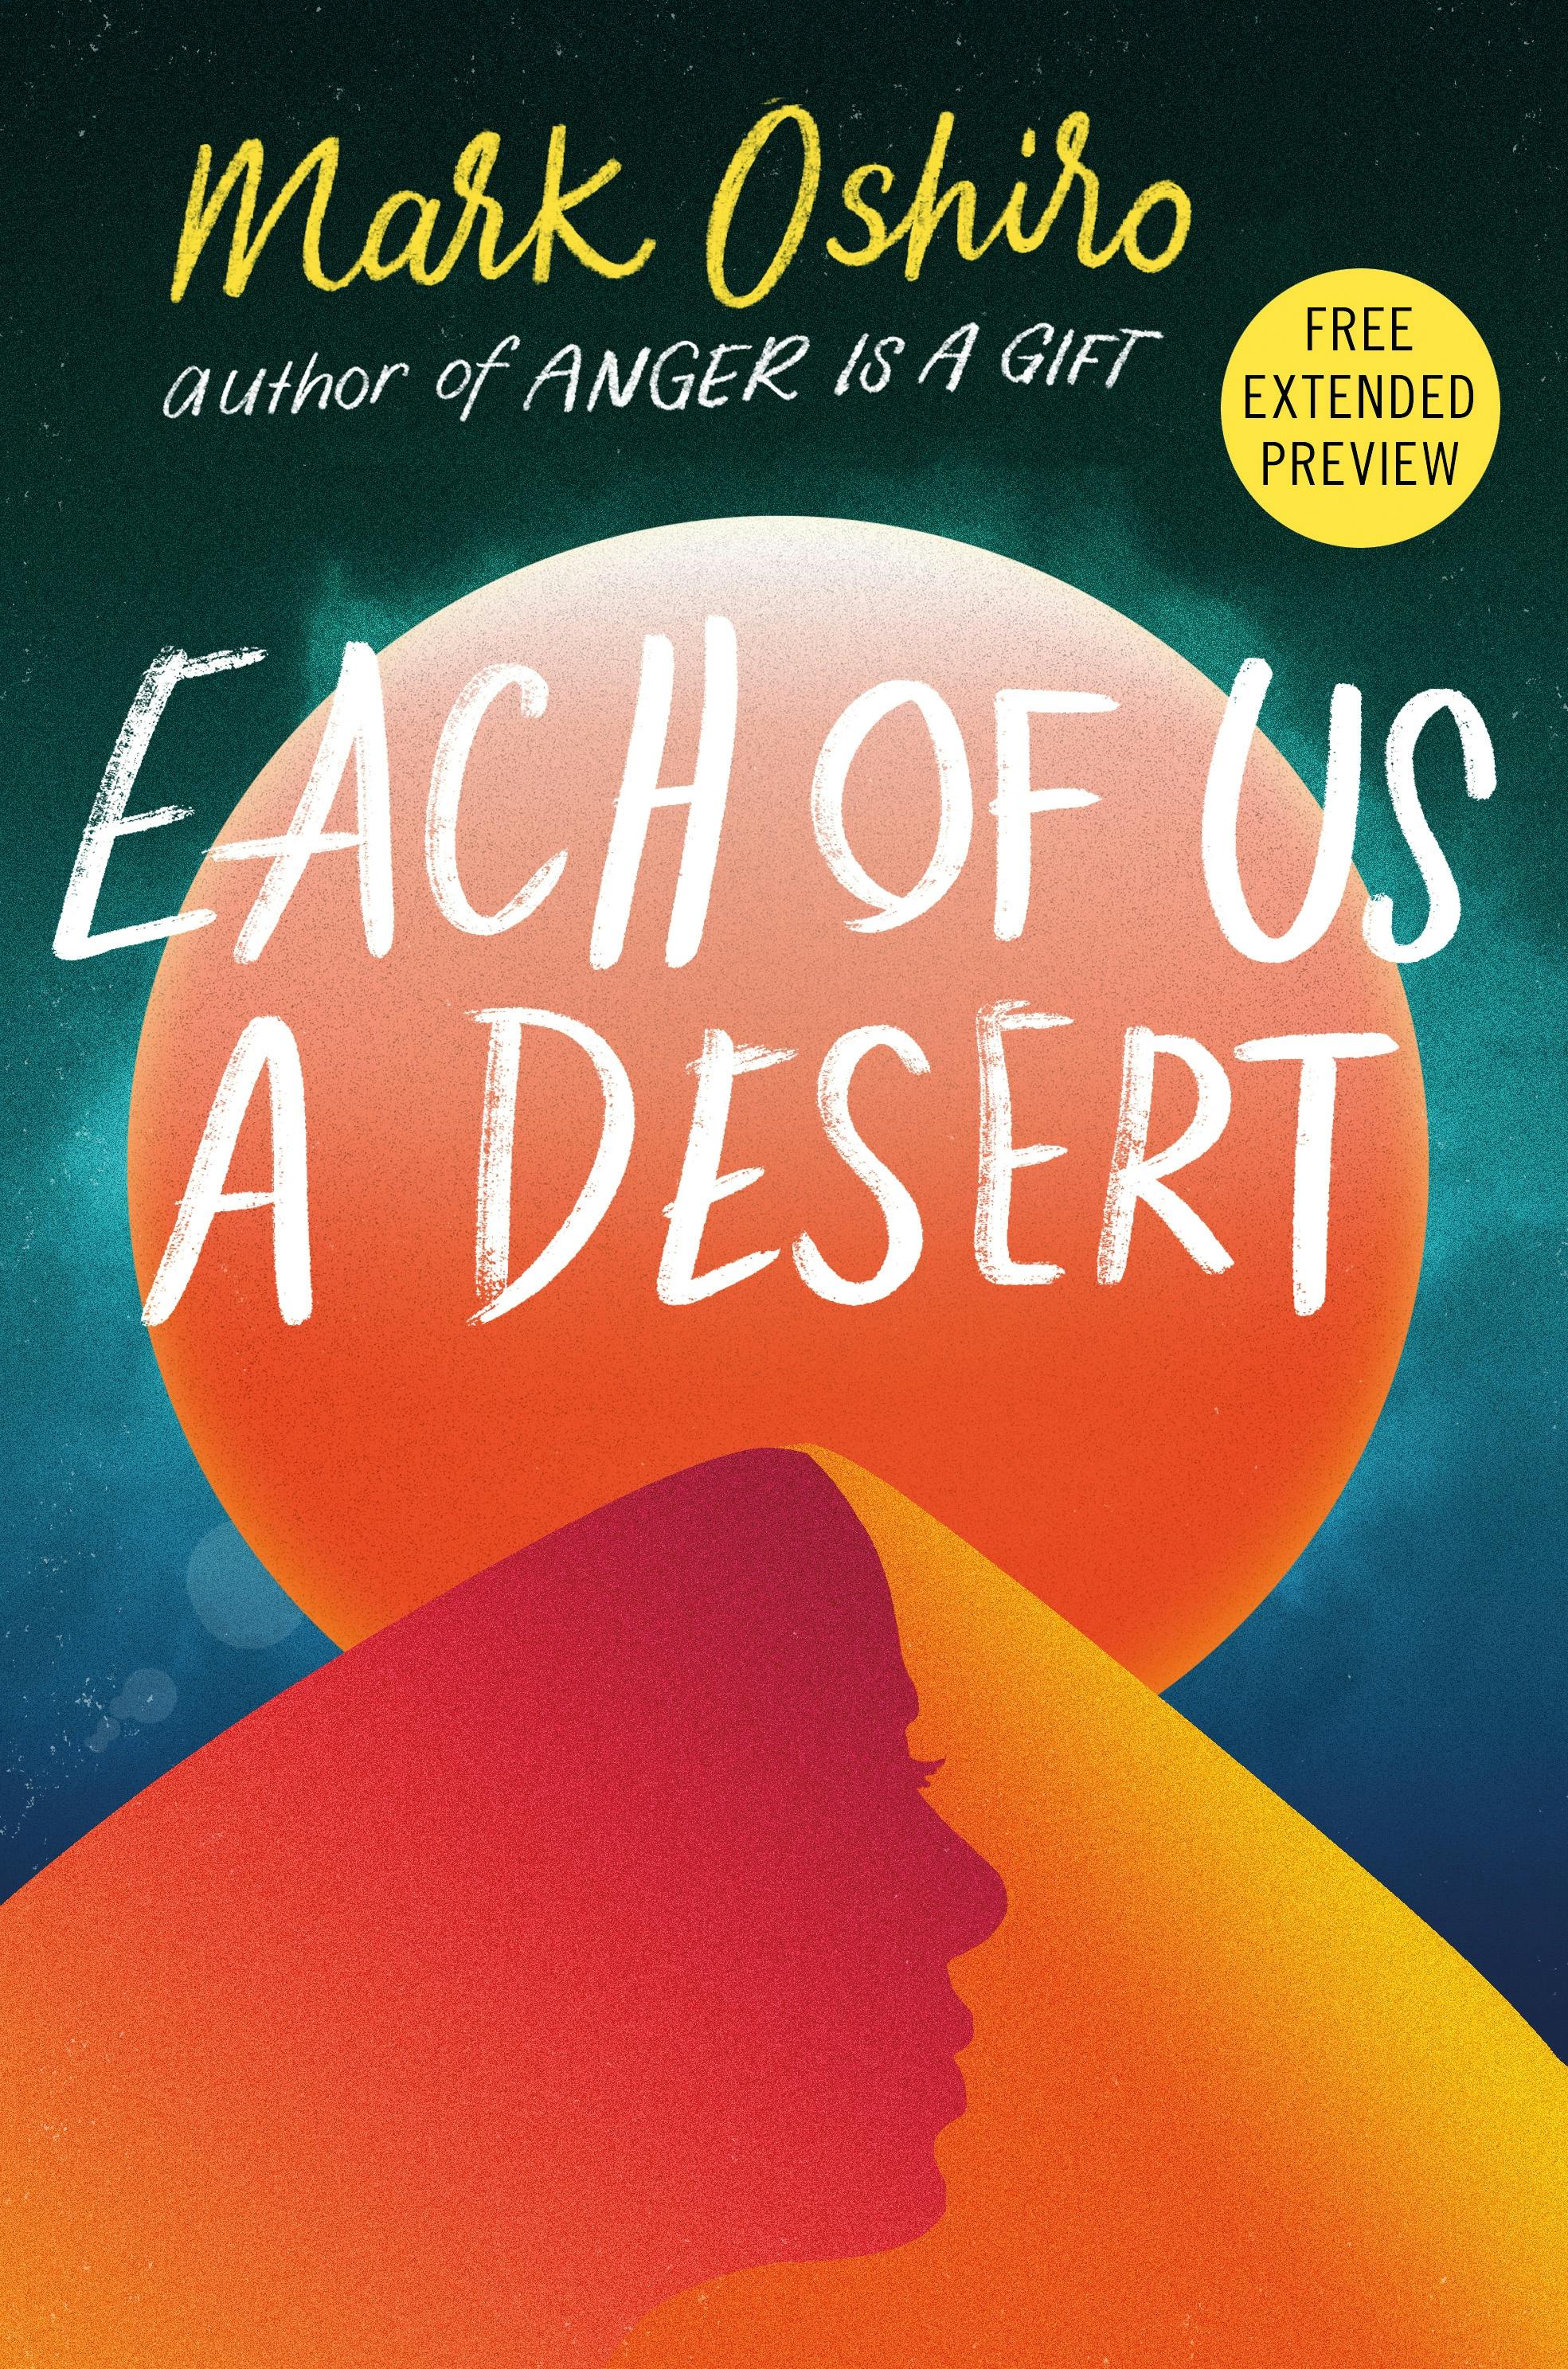 Cover for the book titled as: Each of Us a Desert Sneak Peek